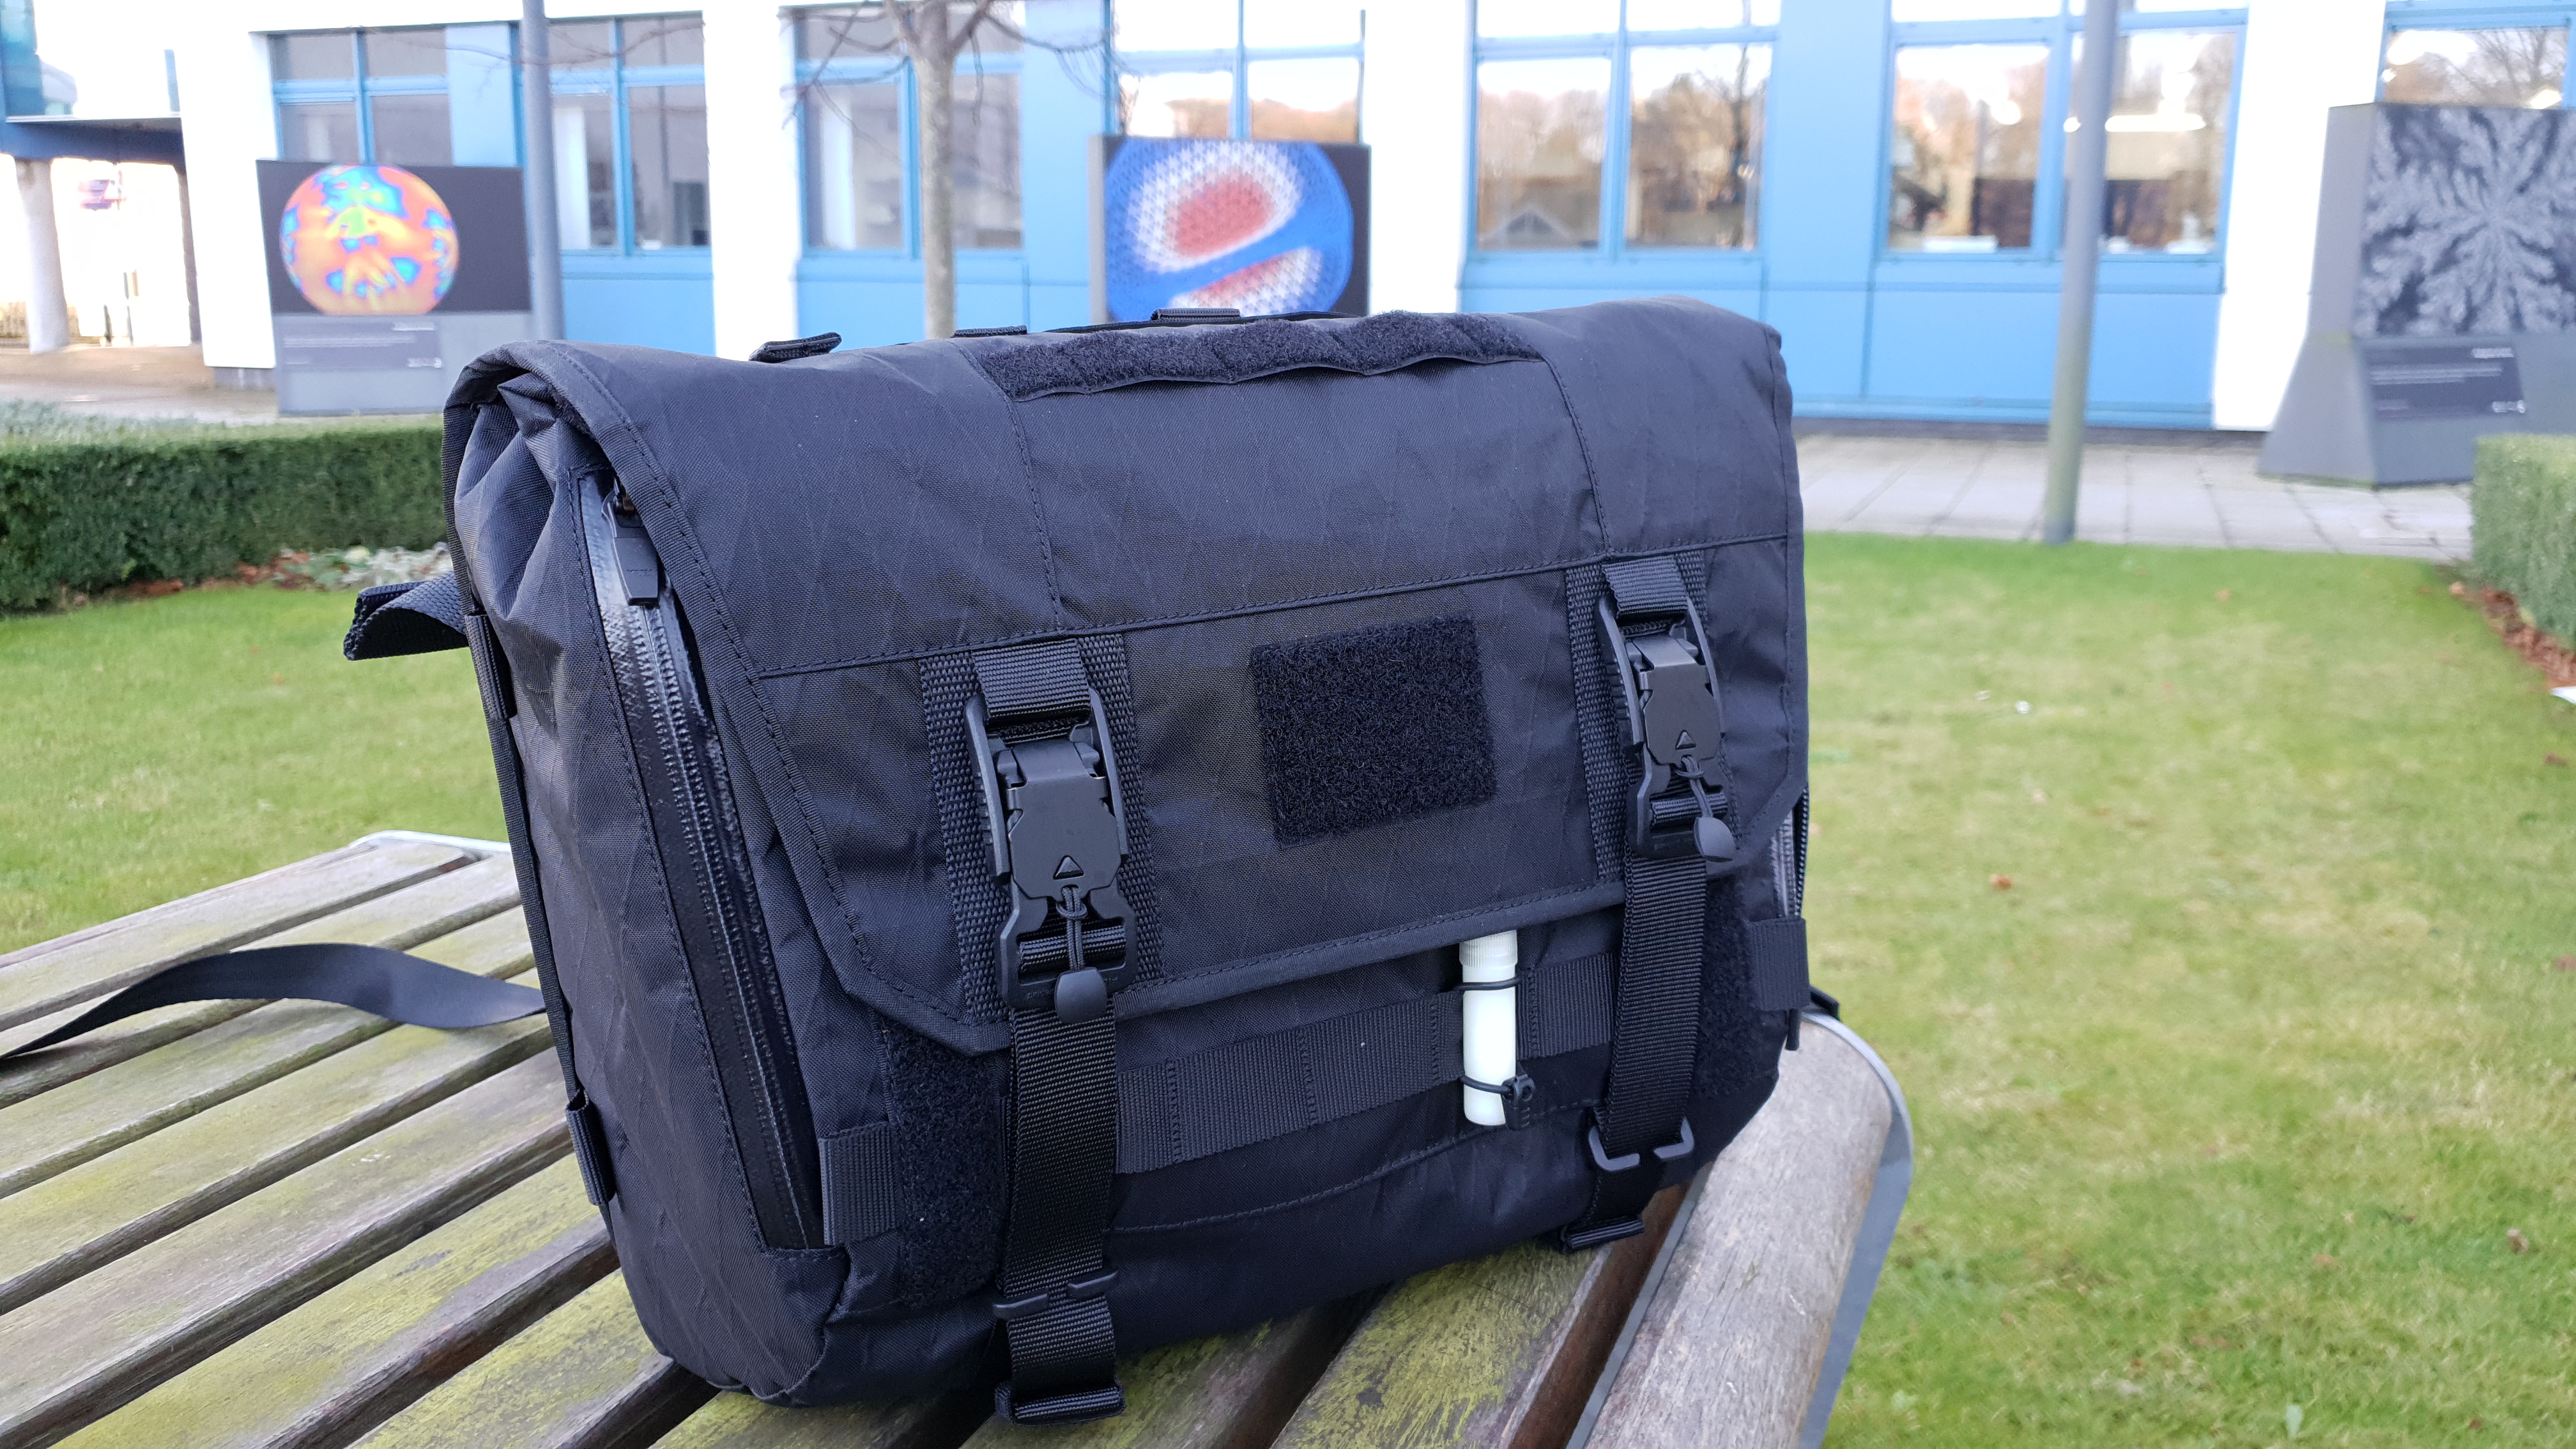 Orbit Gear R221: Review - The Perfect Pack